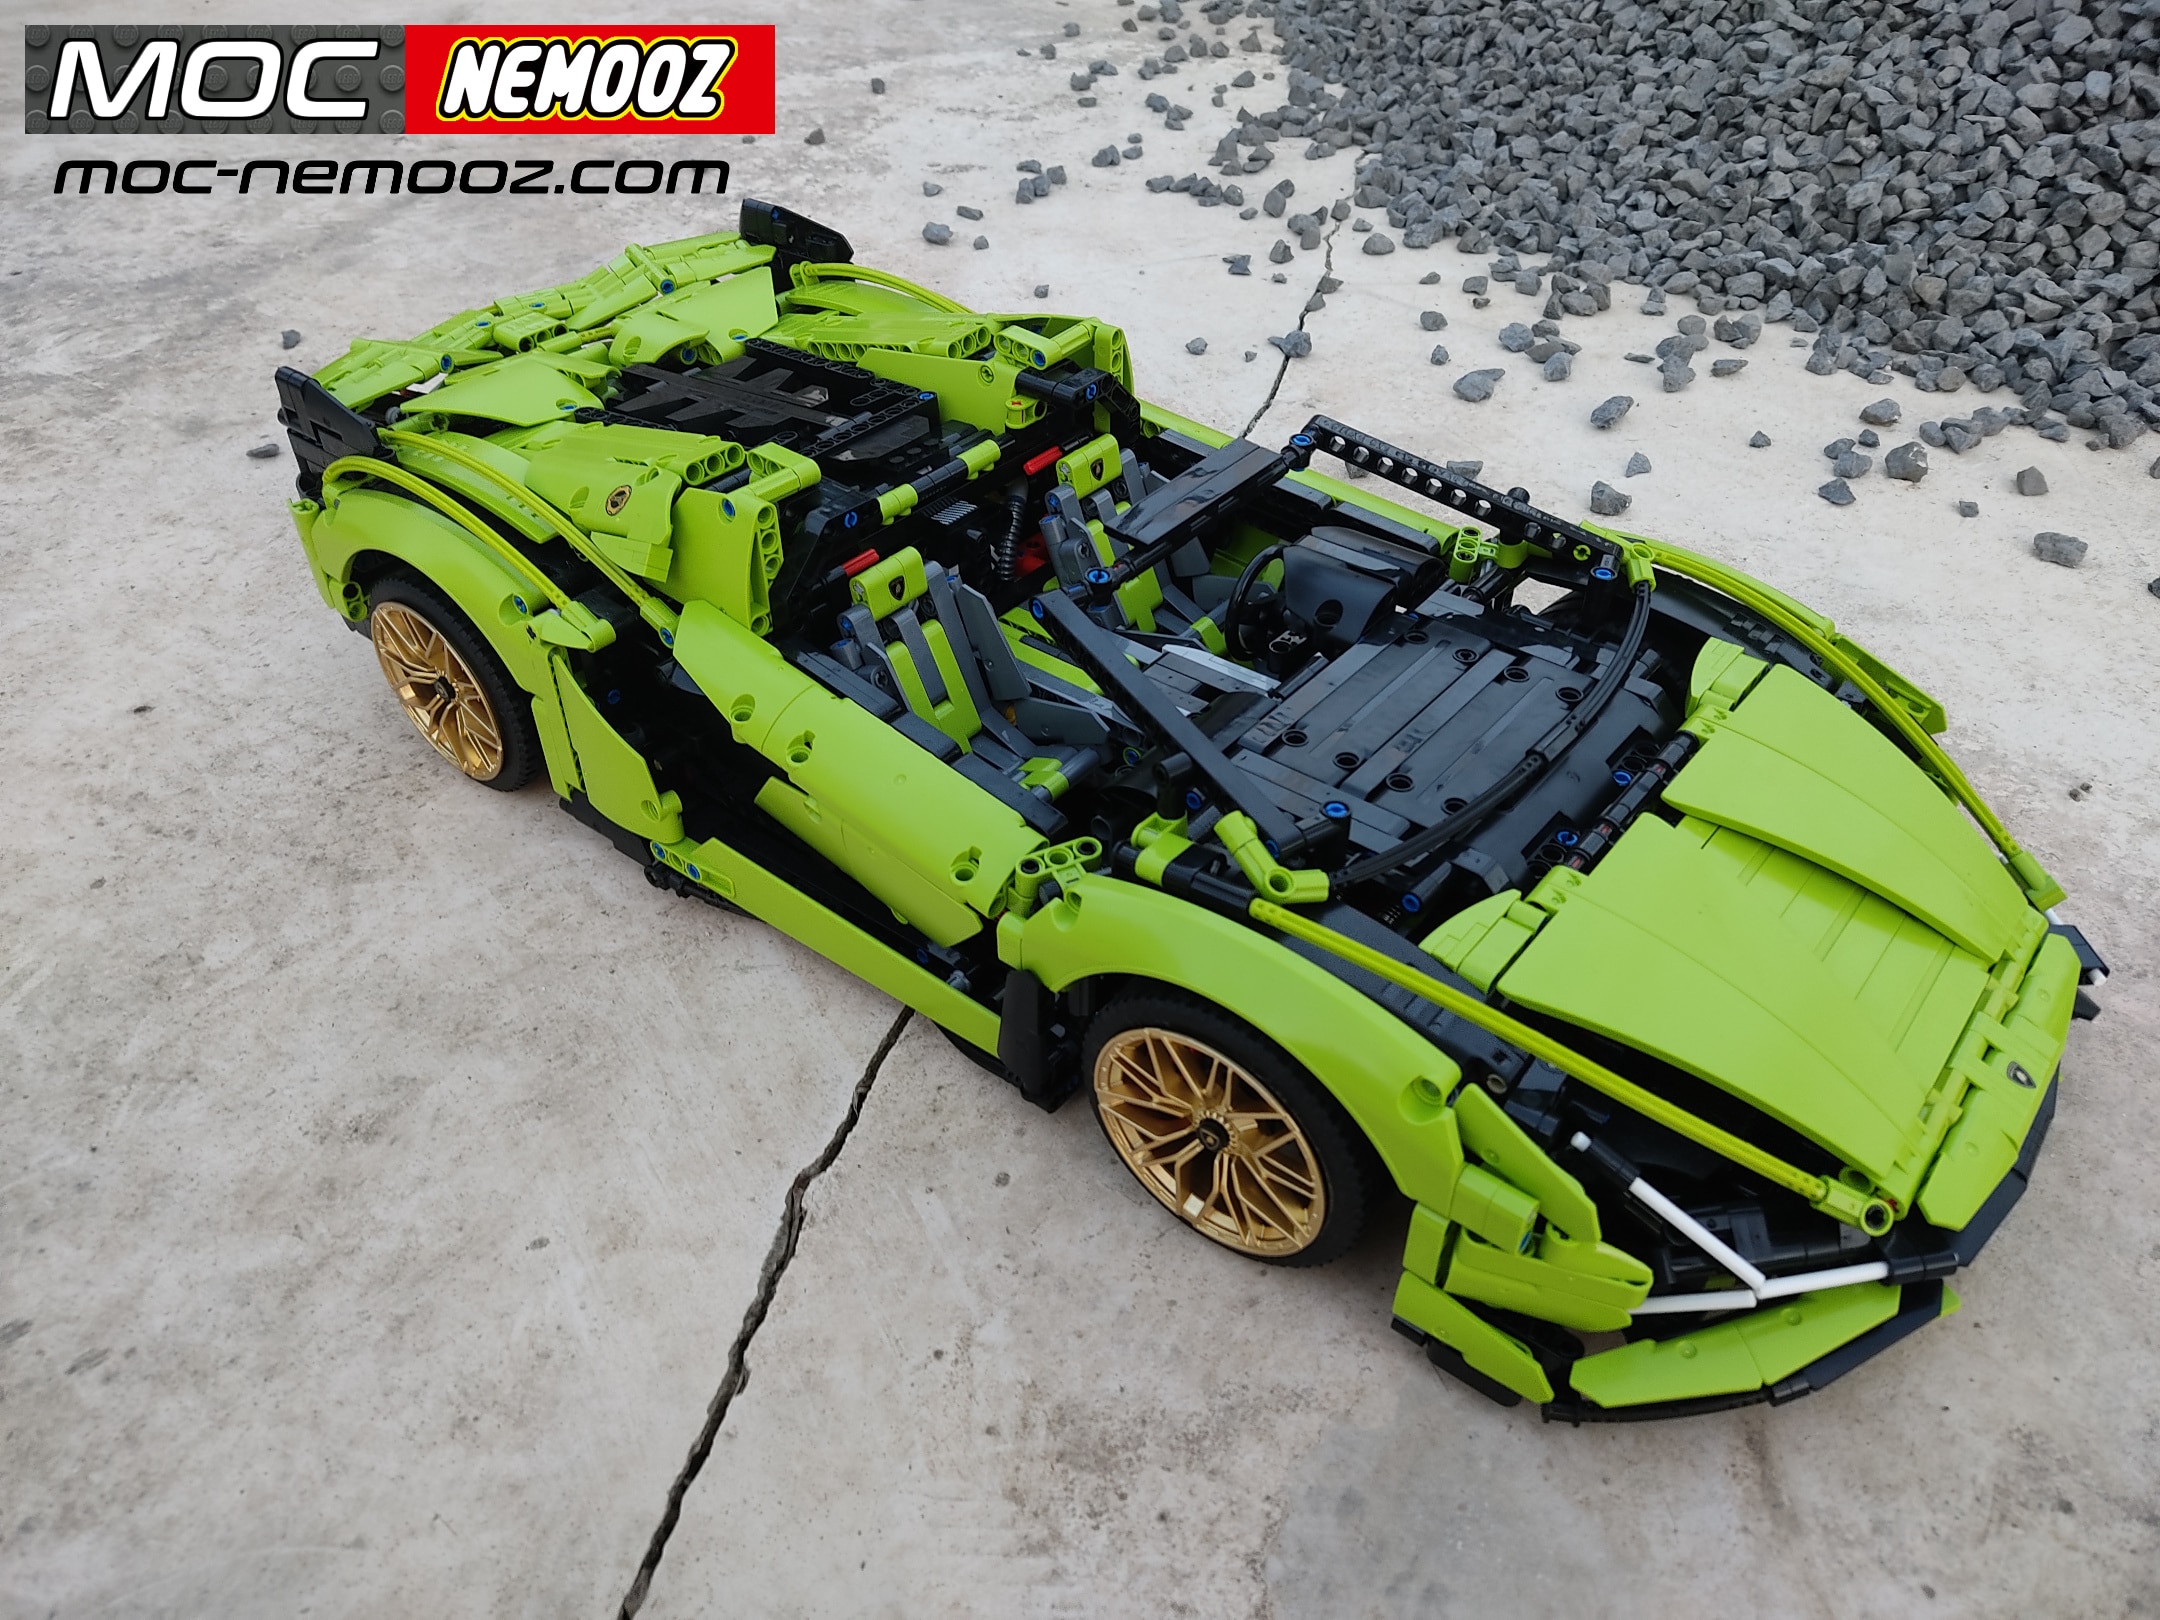 LEGO TECHNIC LAMBORGHINI SIAN ROADSTER Lambirghini Sian roadster an alternate model for 42115 lamborghini sian LEGO official. This MOC contains various cosmetic changes I made to Lego set 42115, to more closely represent the Lamborghini Sian roadster.